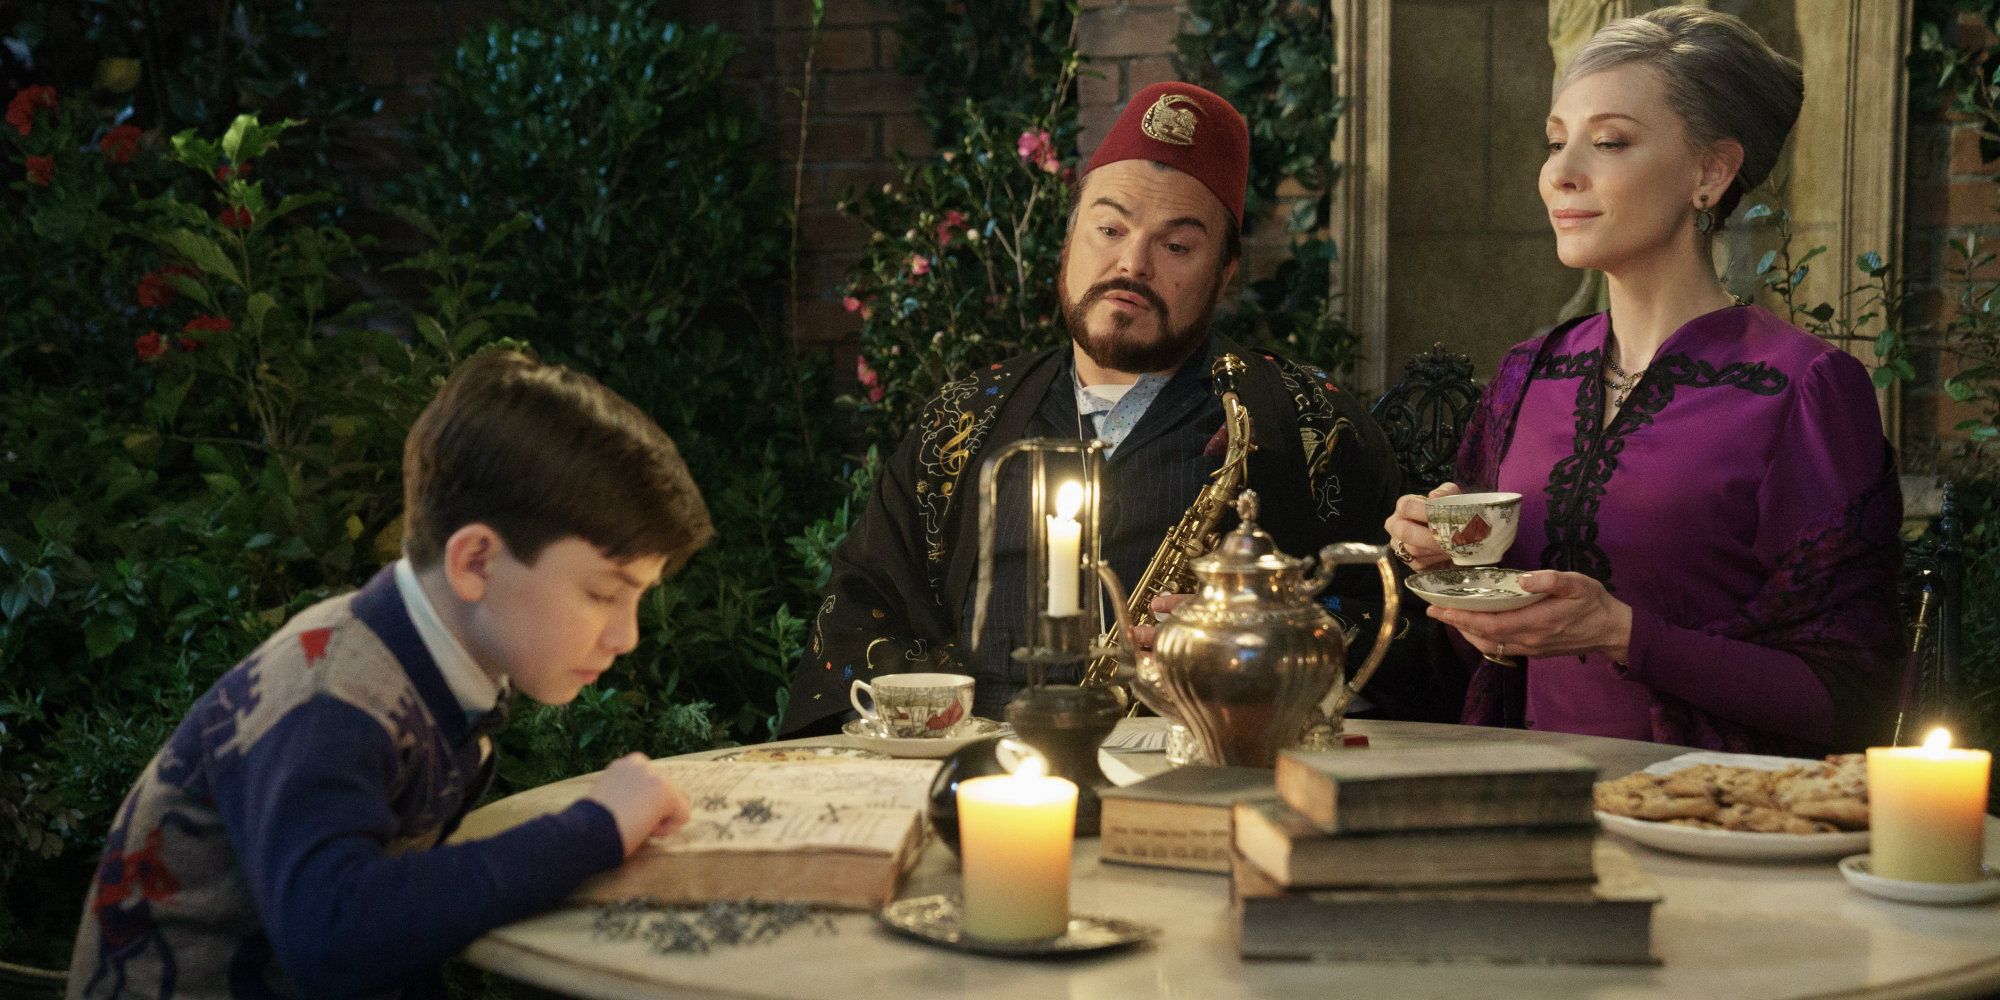 The House With A Clock In Its Walls Owen Vaccaro Jack Black Cate Blanchett